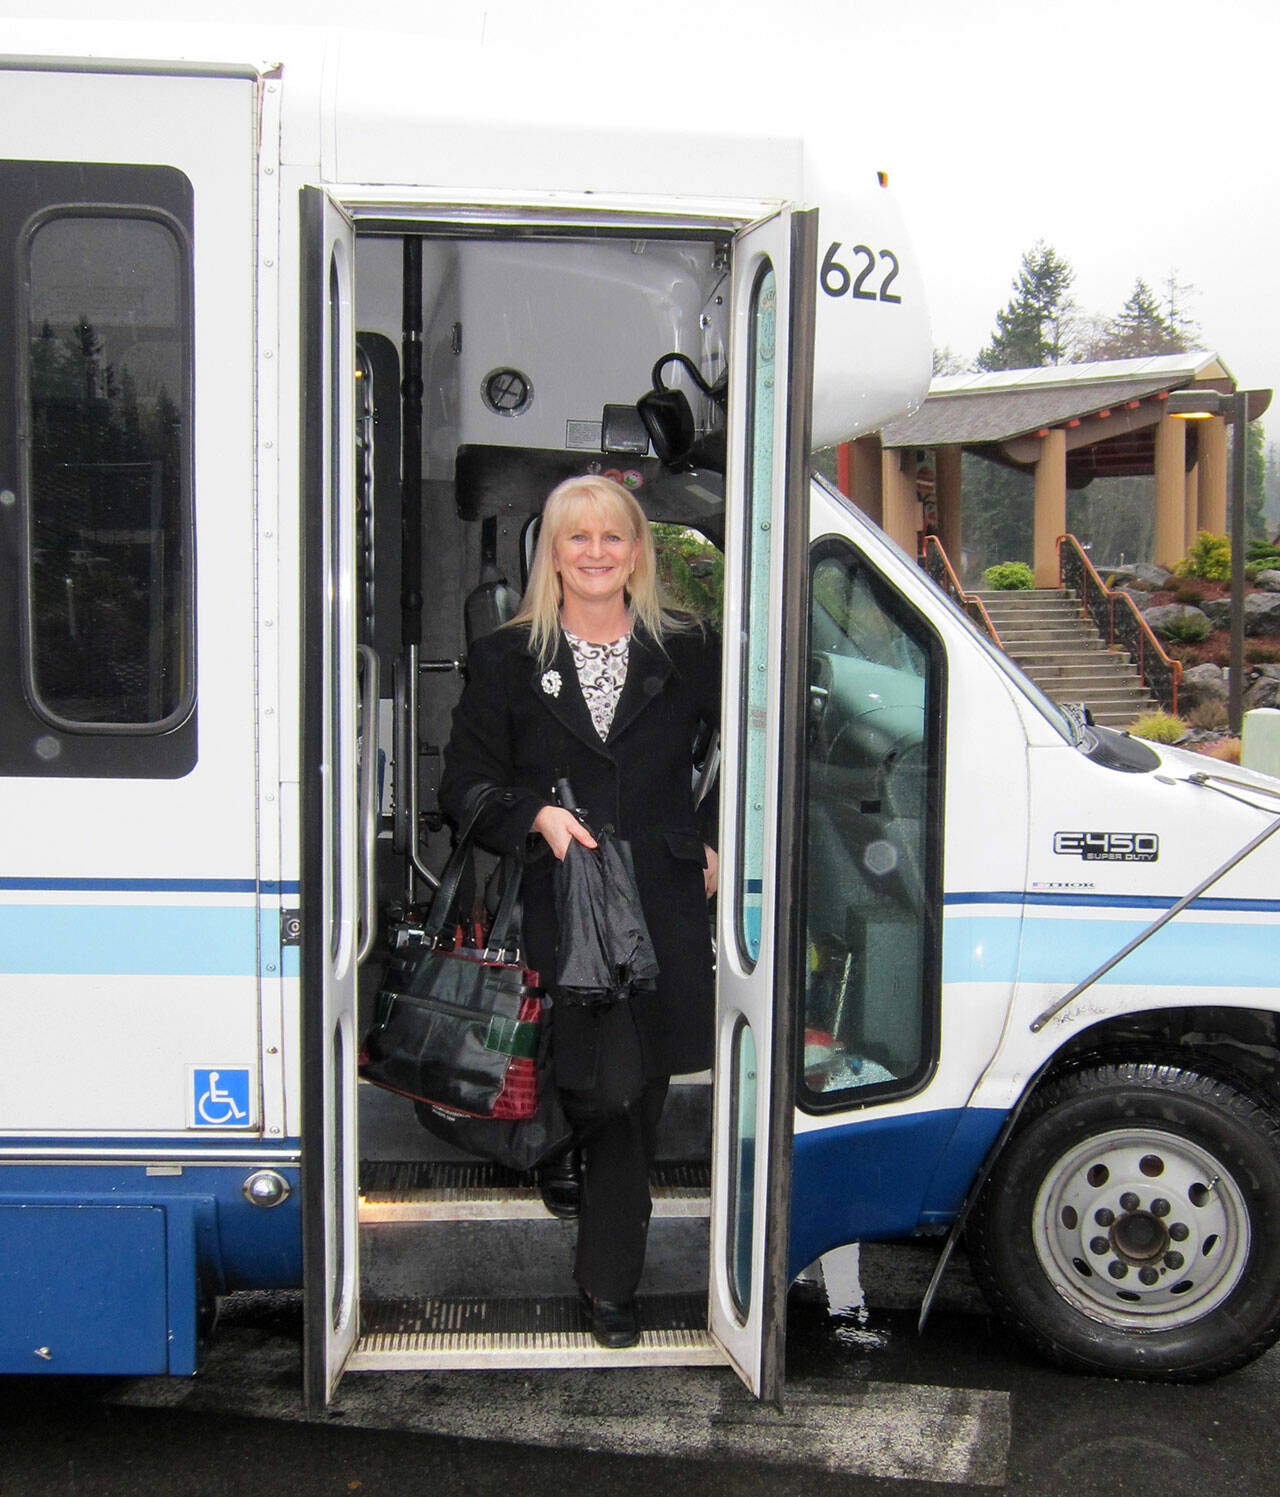 Annette Nesse disembarks a Clallam Transit bus at a stop on the Jamestown route she helped coordinate as the Jamestown S’Klallam Tribe’s transportation lead. (Photo courtesy of Jamestown S’Klallam Tribe)